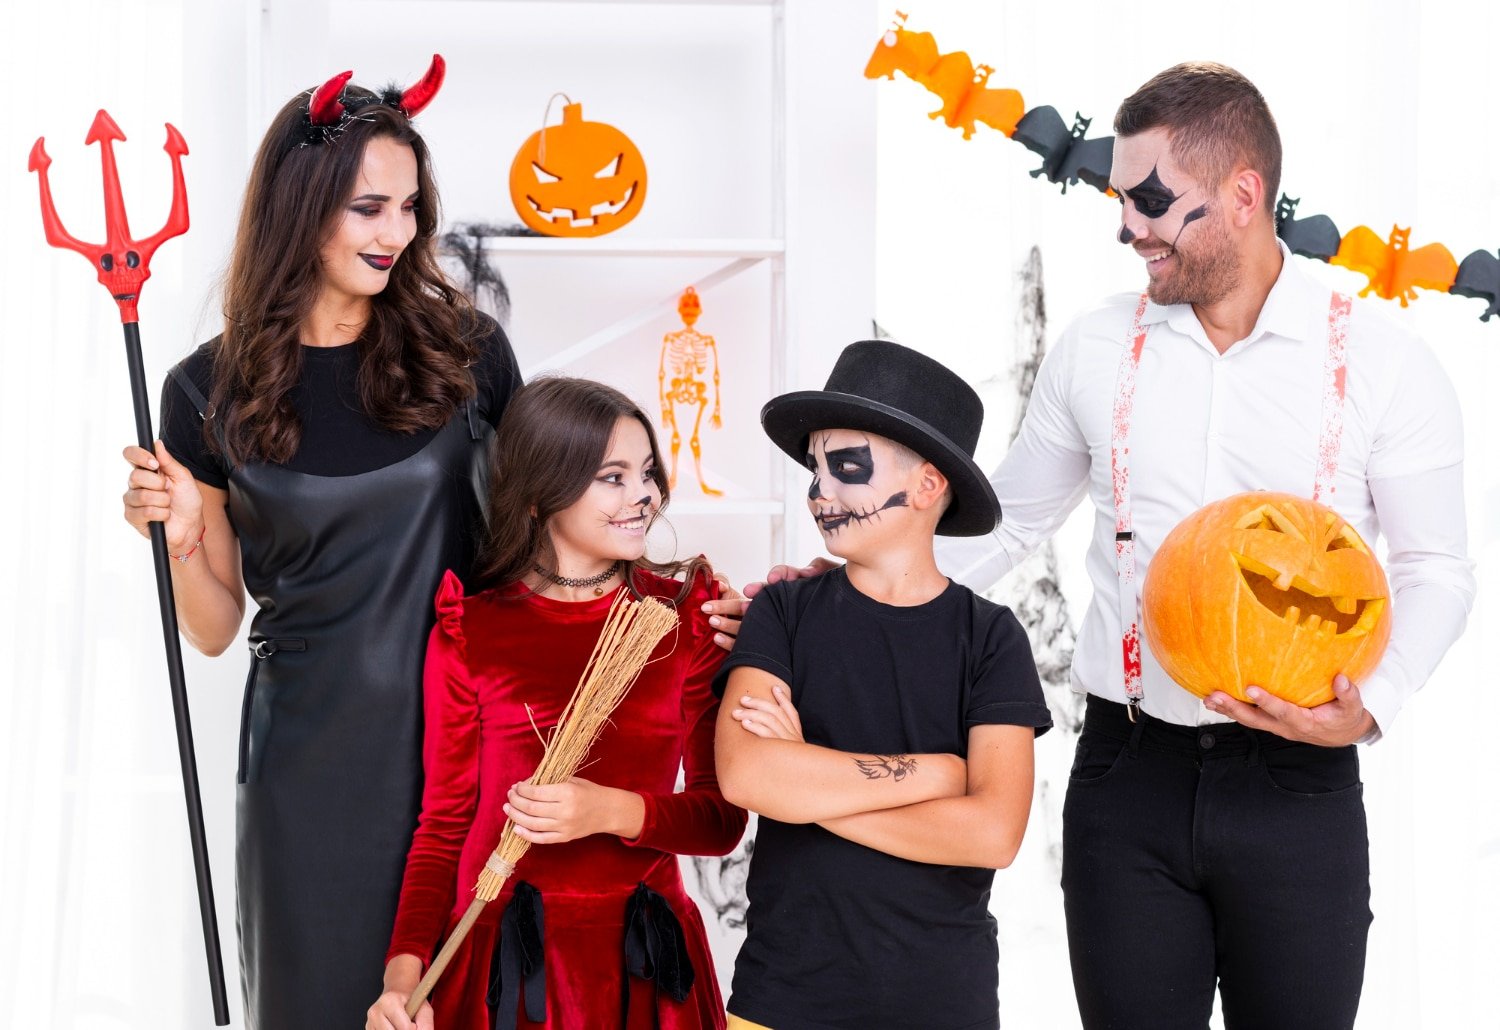 Find The Perfect Costume With Fun.com’s Extensive Halloween Selection